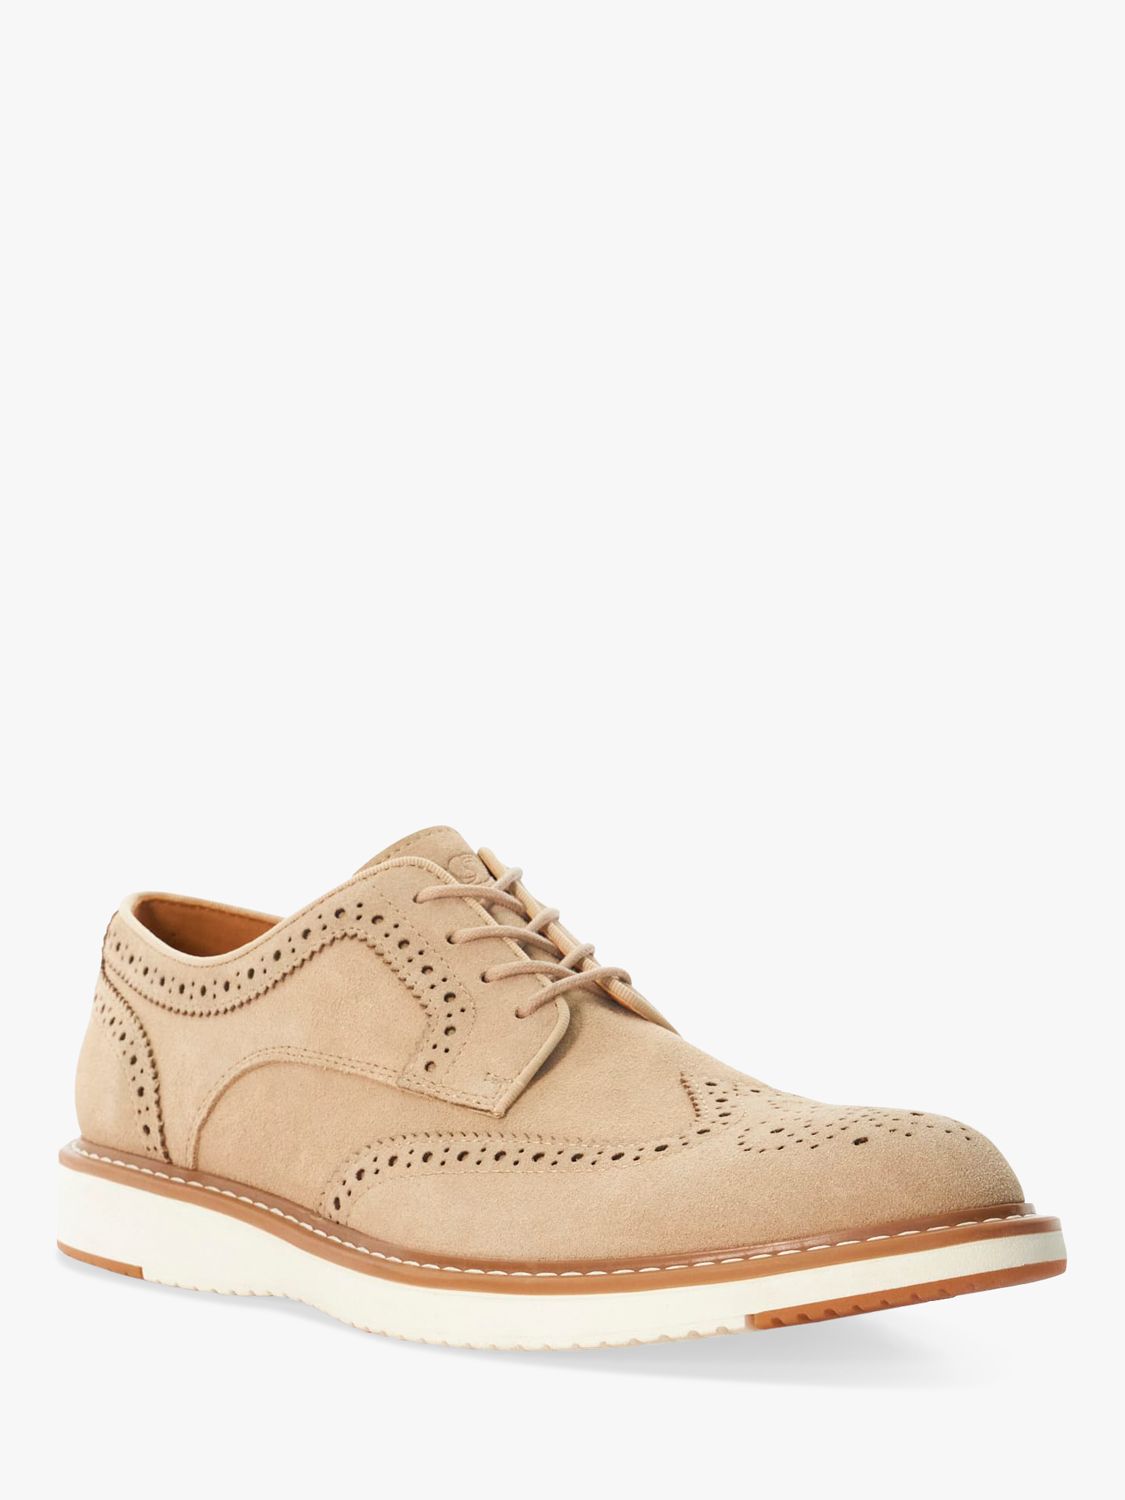 Buy Dune Bronny Suede Brouge Lace Up Shoes, Sand Online at johnlewis.com